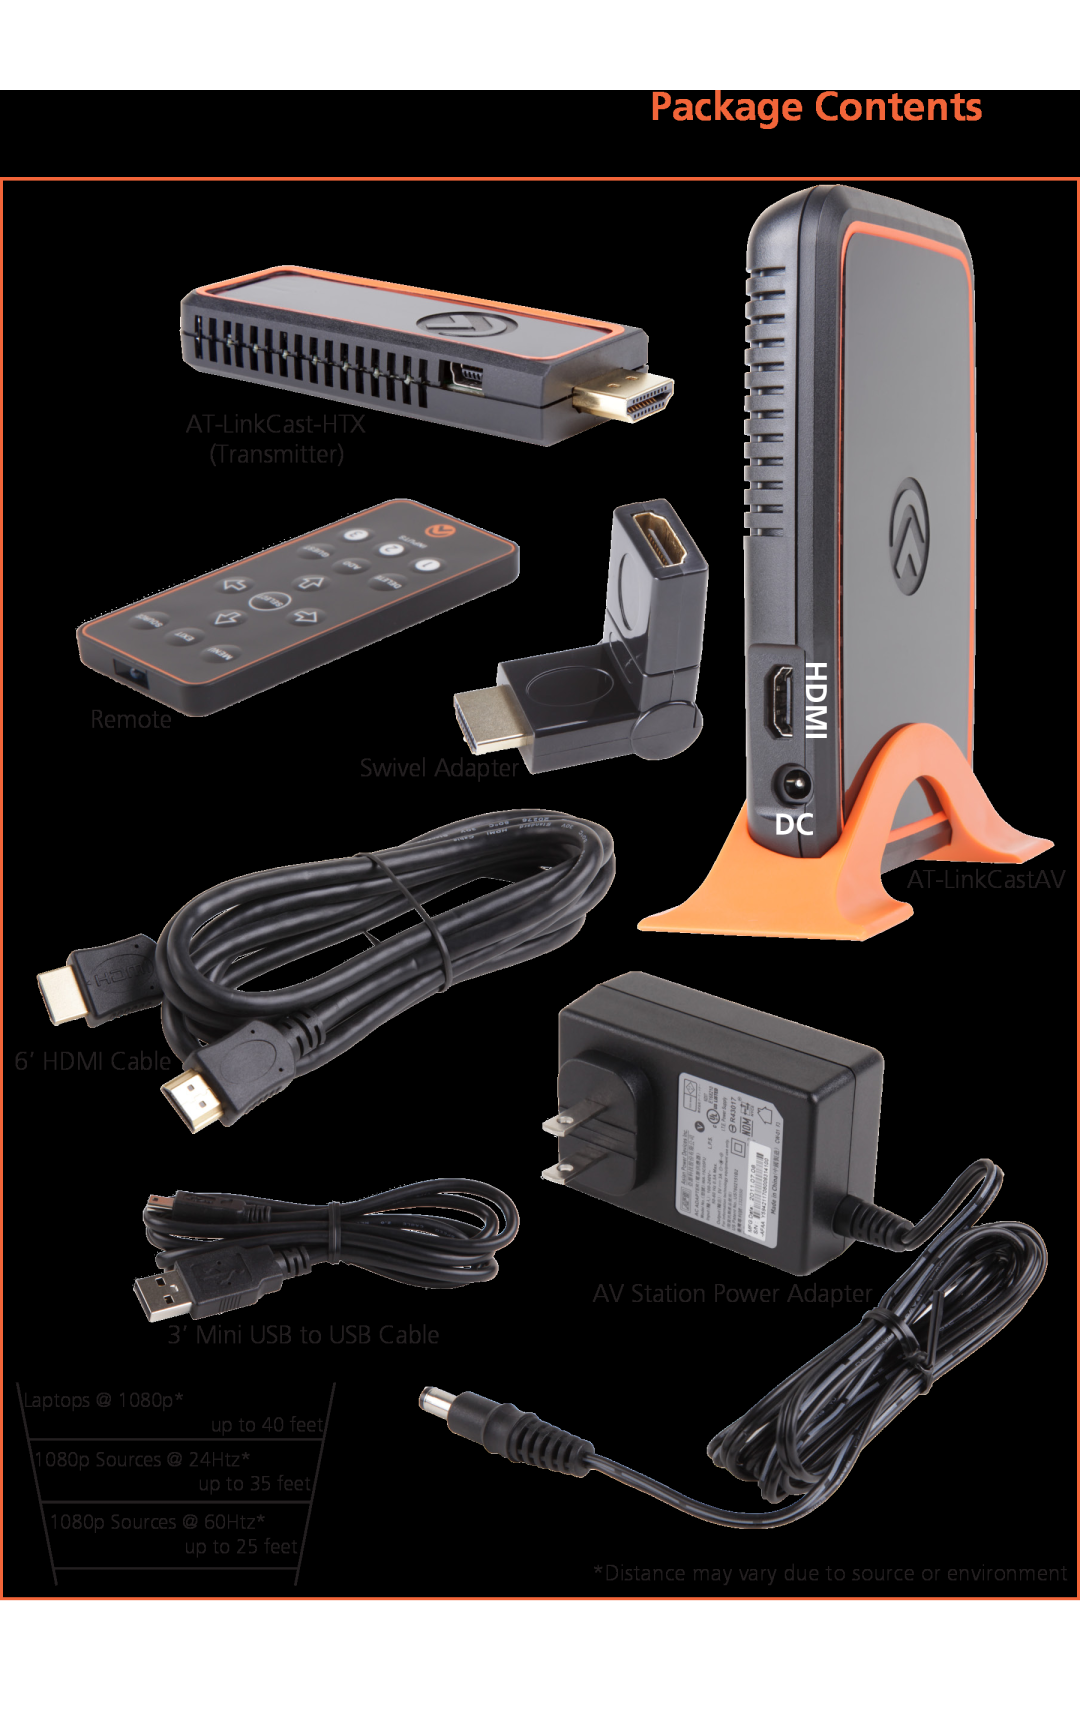 Atlona Rev. 2.0 manual Package Contents, Hdmi, Laptops @ 1080p up to 40 feet, 1080p Sources @ 24Htz up to 35 feet 